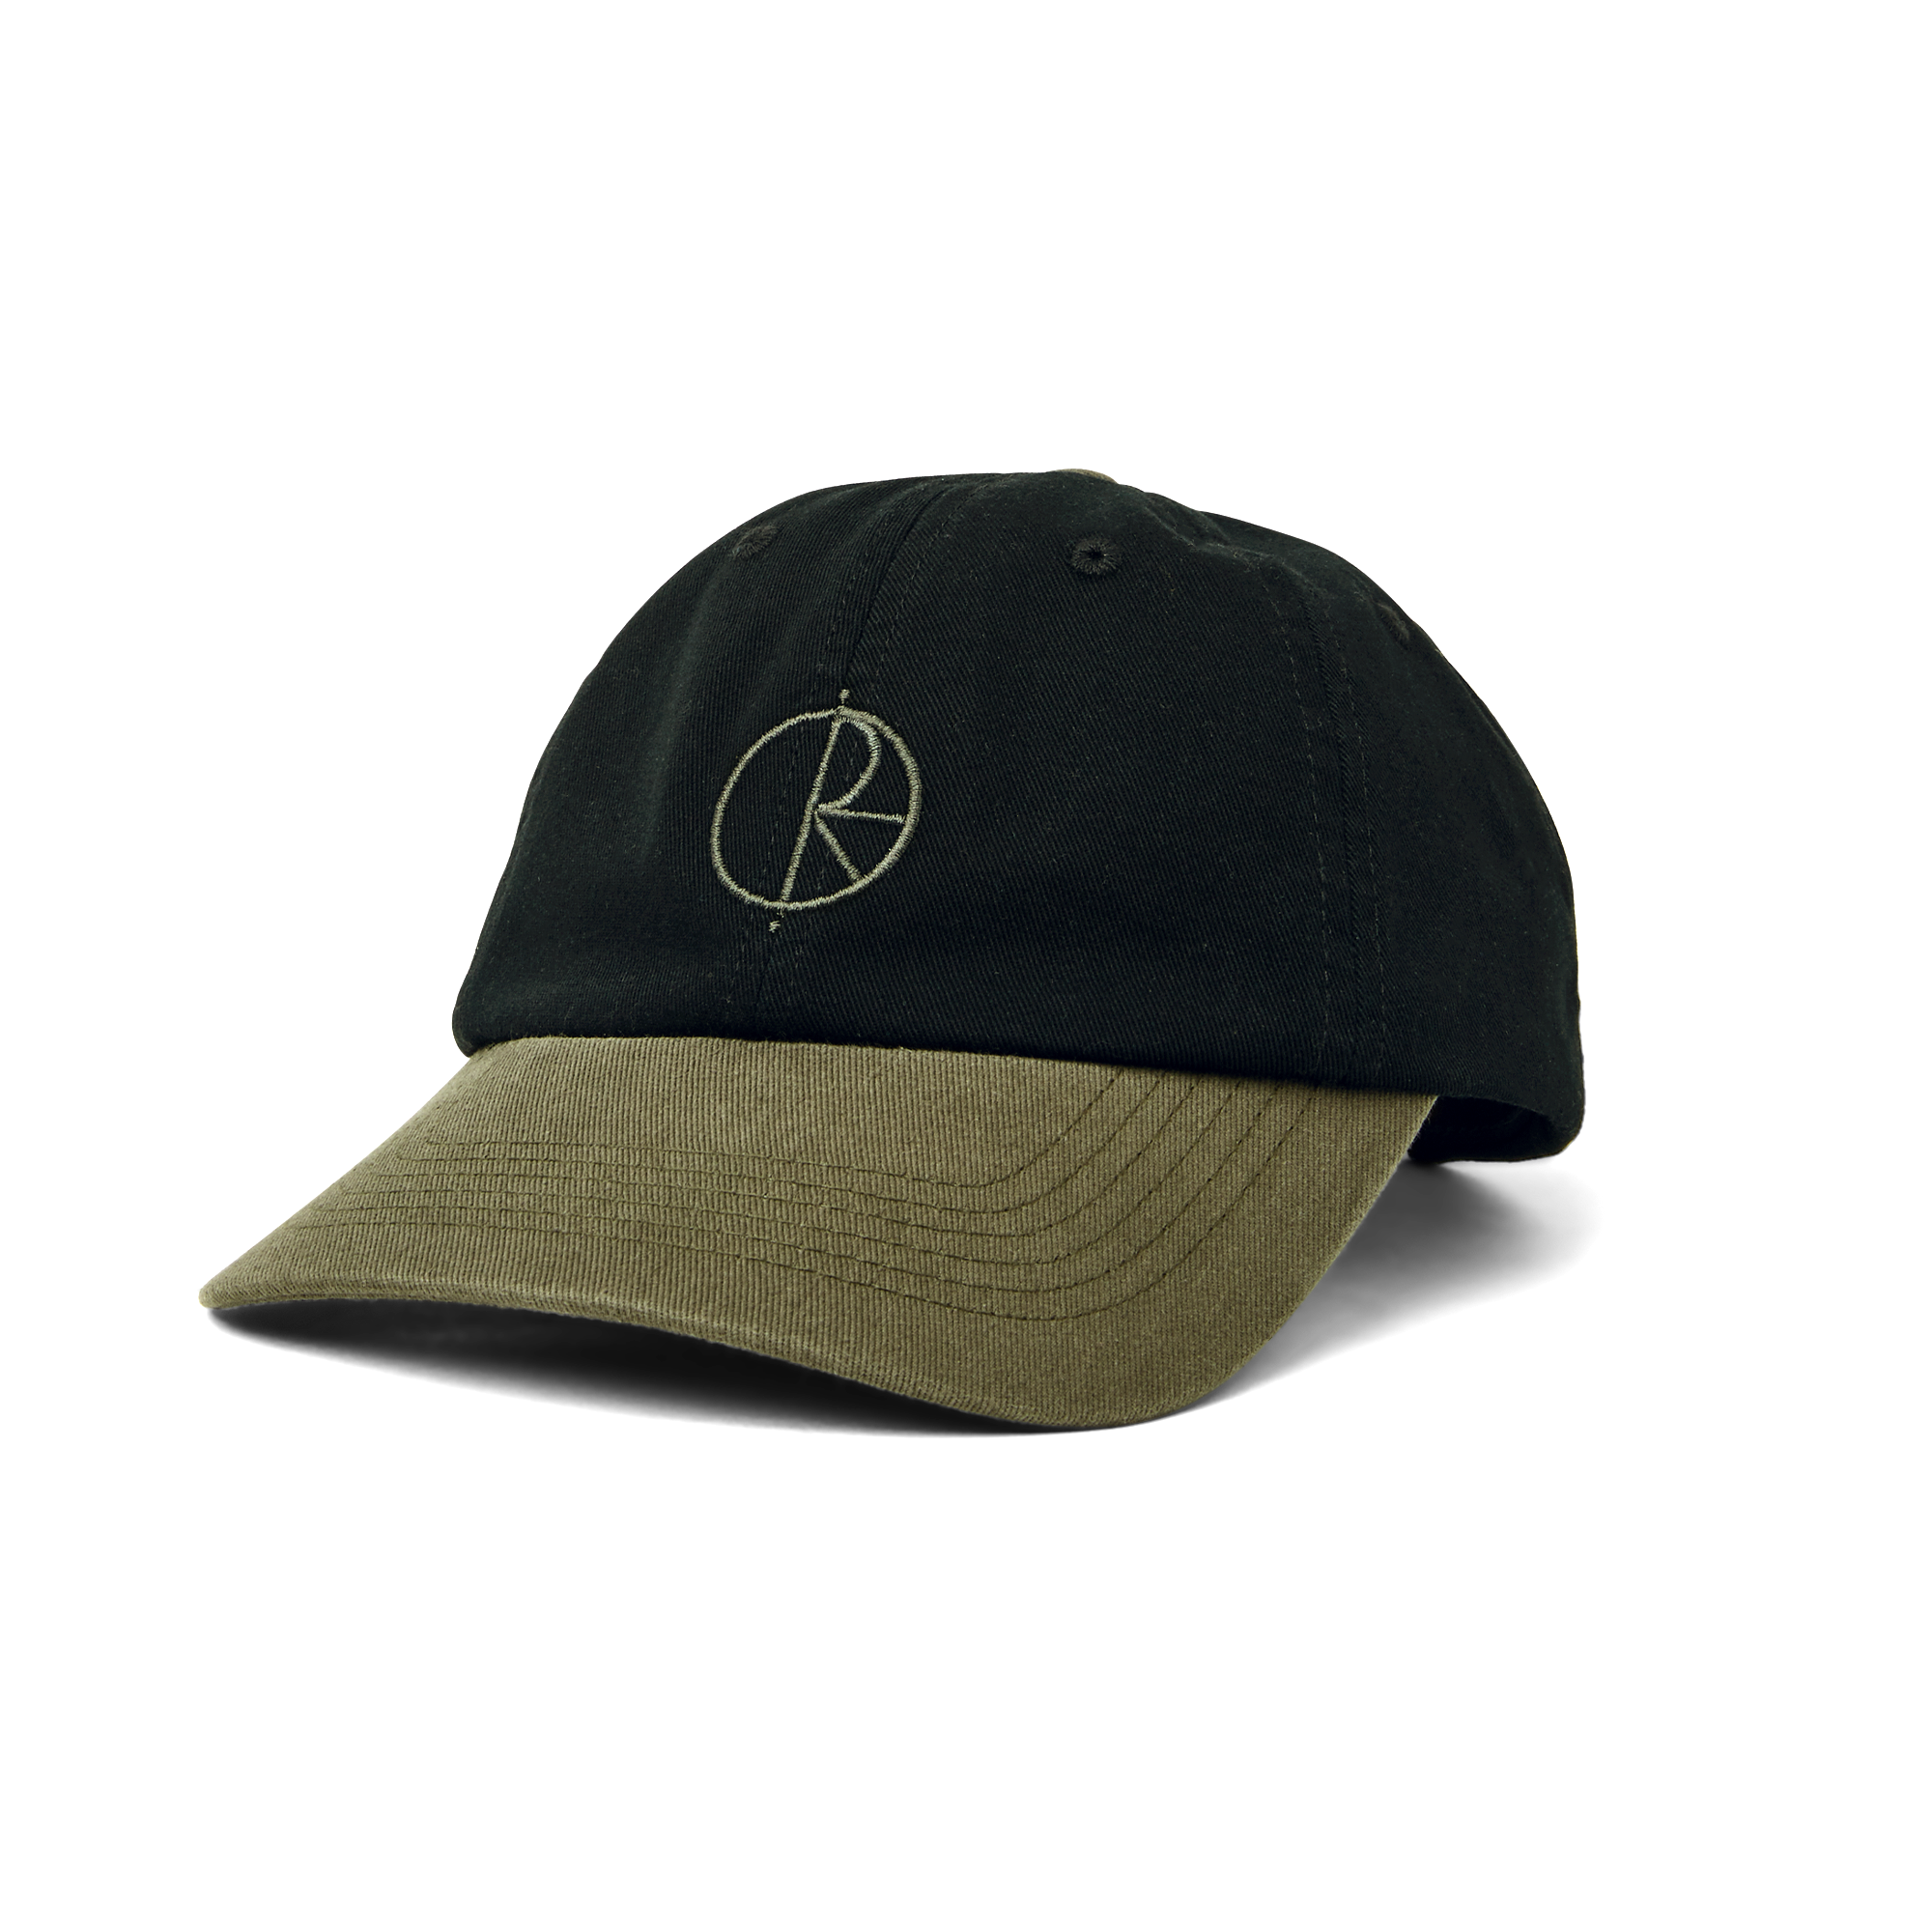 Panorama storhedsvanvid rolle POLAR - Duo Stroke Logo Cap "Black/Army Green" – Lacquer